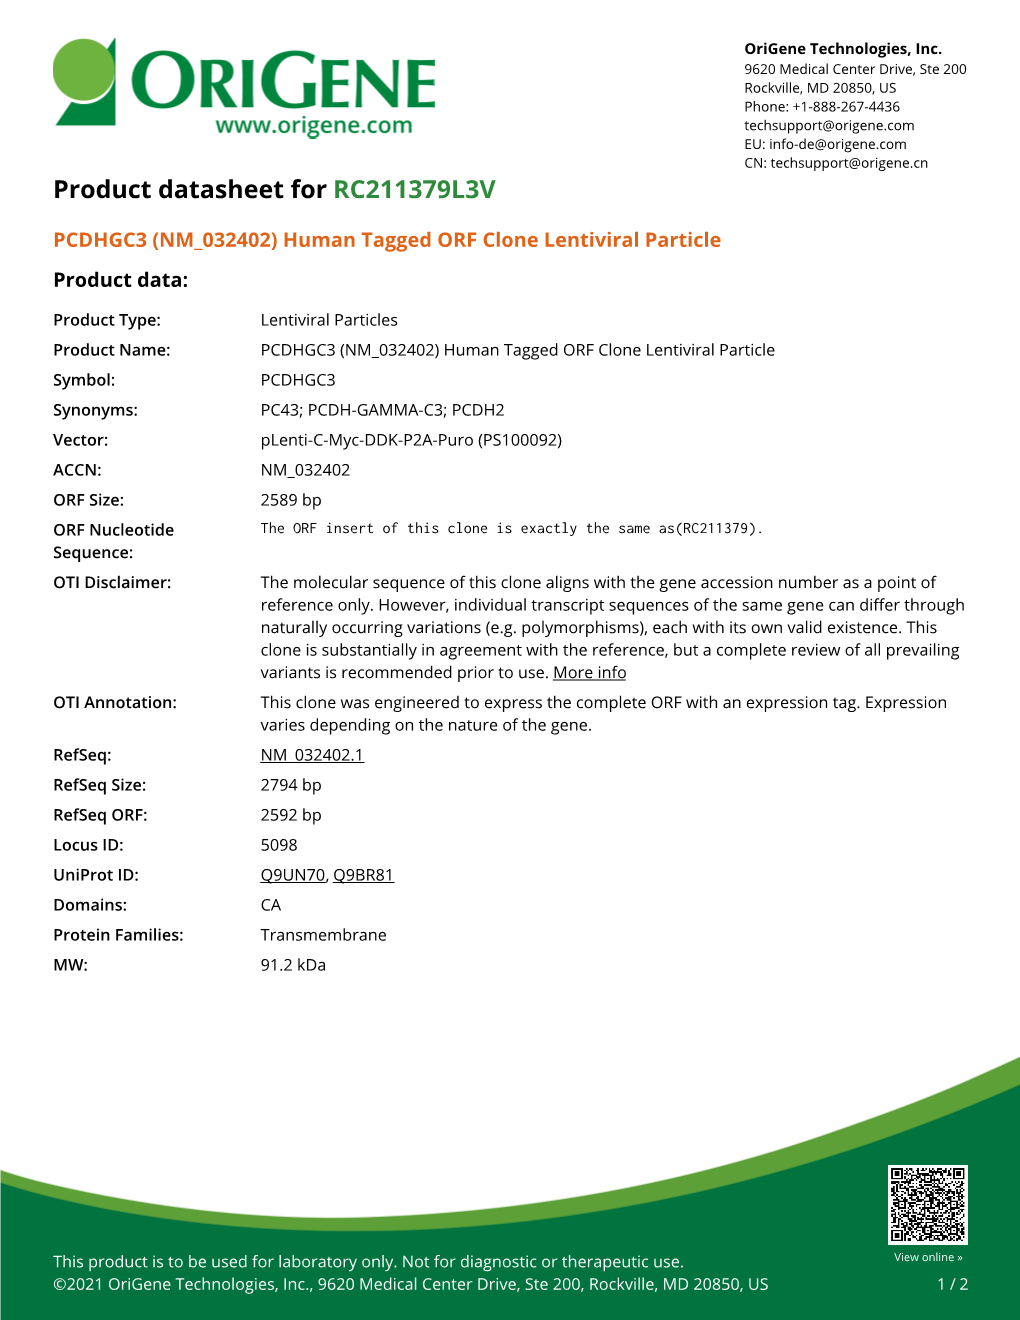 PCDHGC3 (NM 032402) Human Tagged ORF Clone Lentiviral Particle Product Data